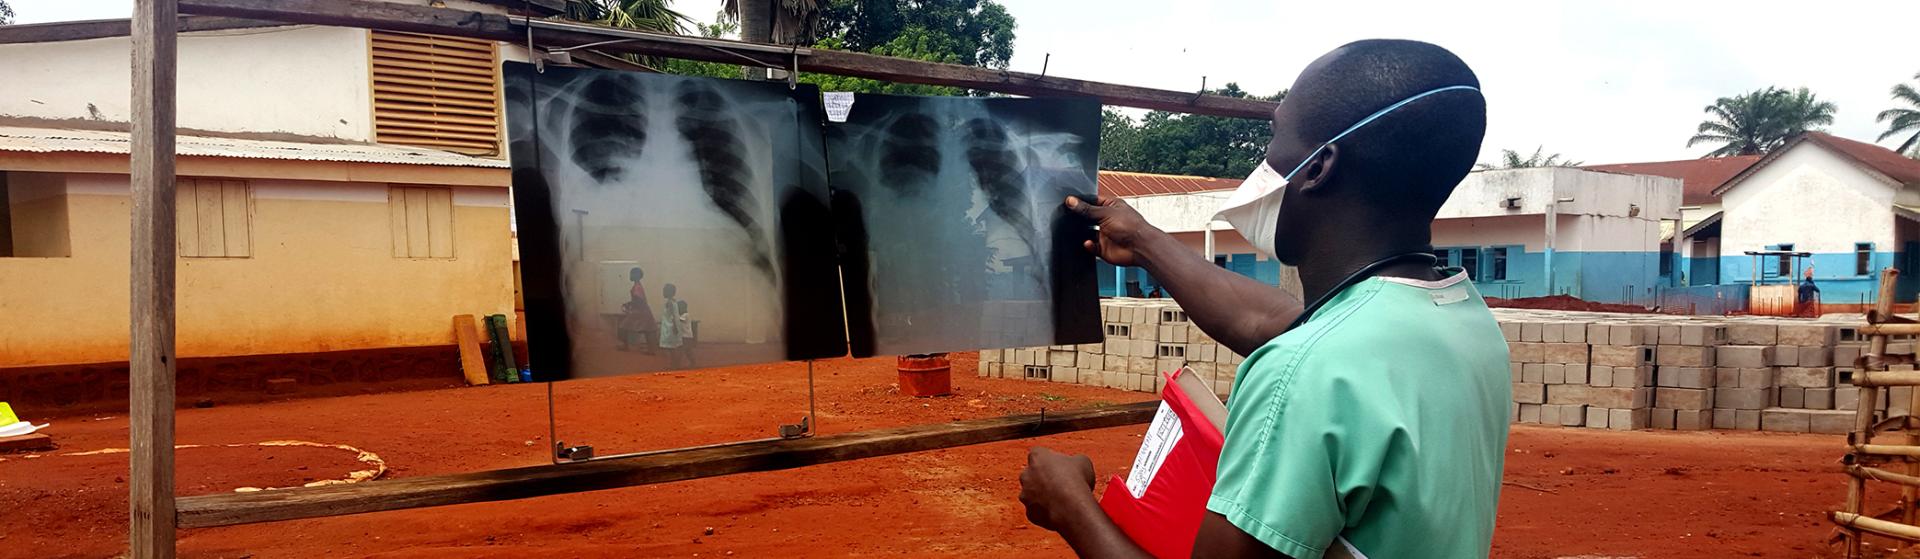 Checking XRays in the Central African Republic